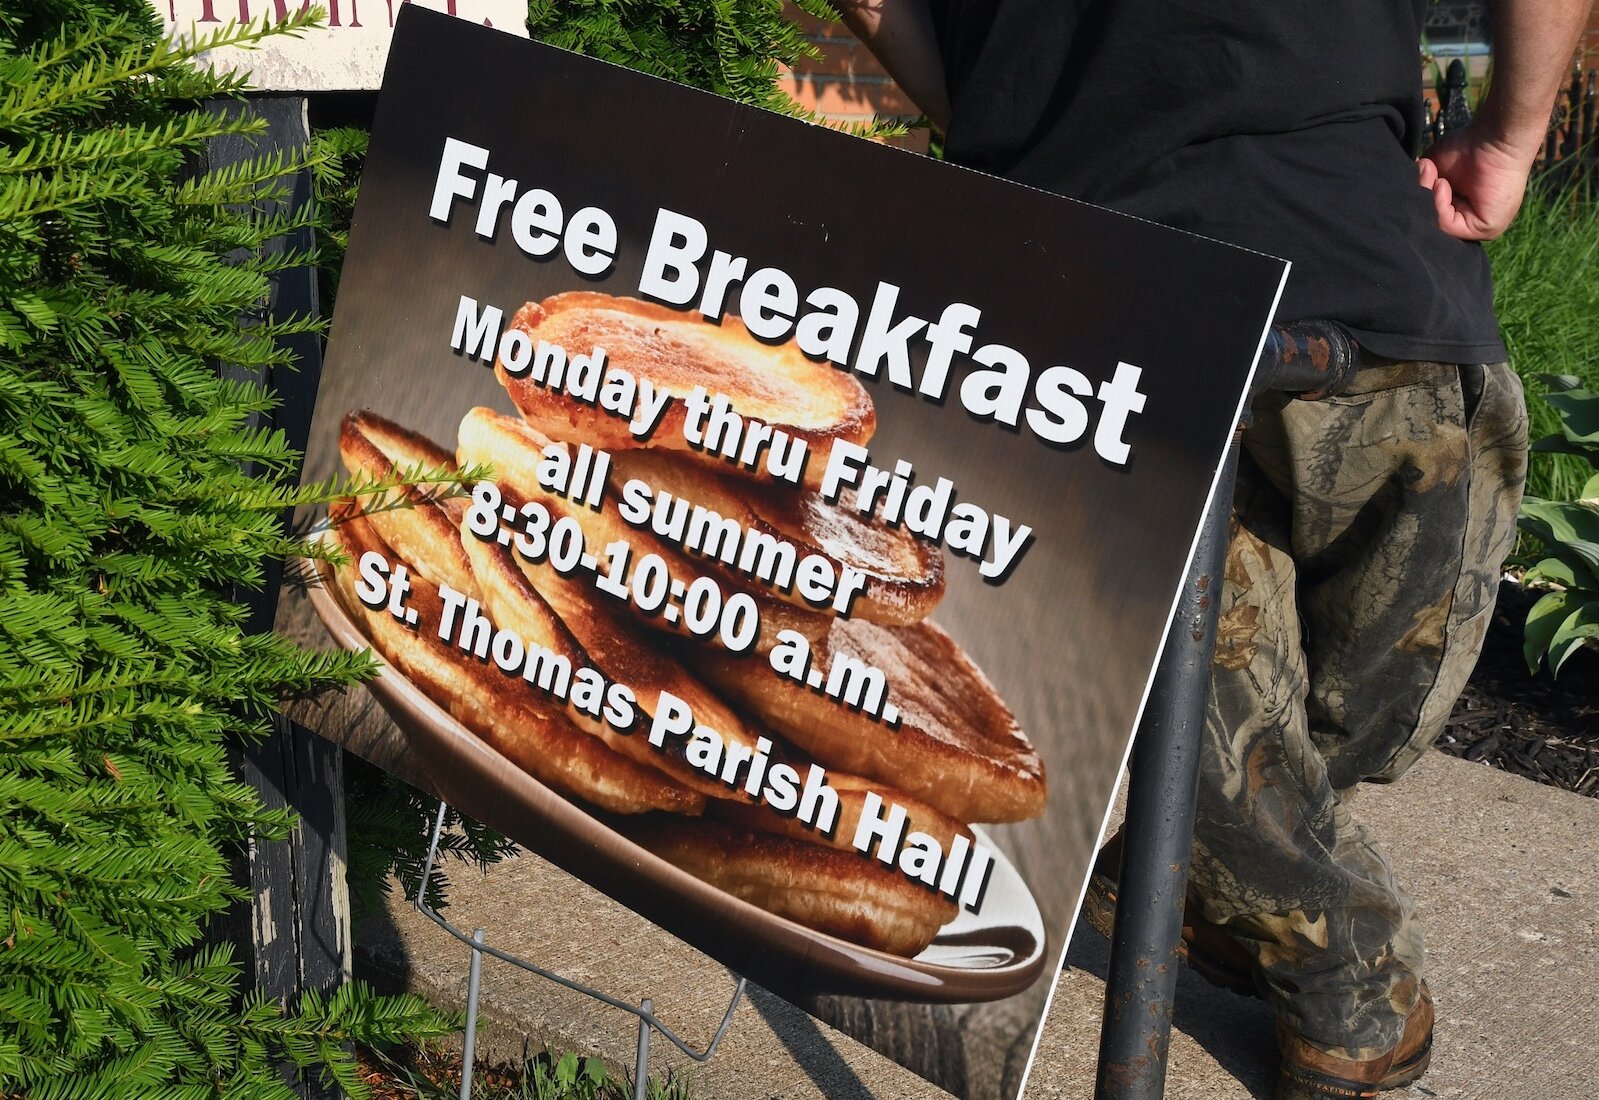 Breakfast is served during the summer months at St. Thomas Episcopal Church.